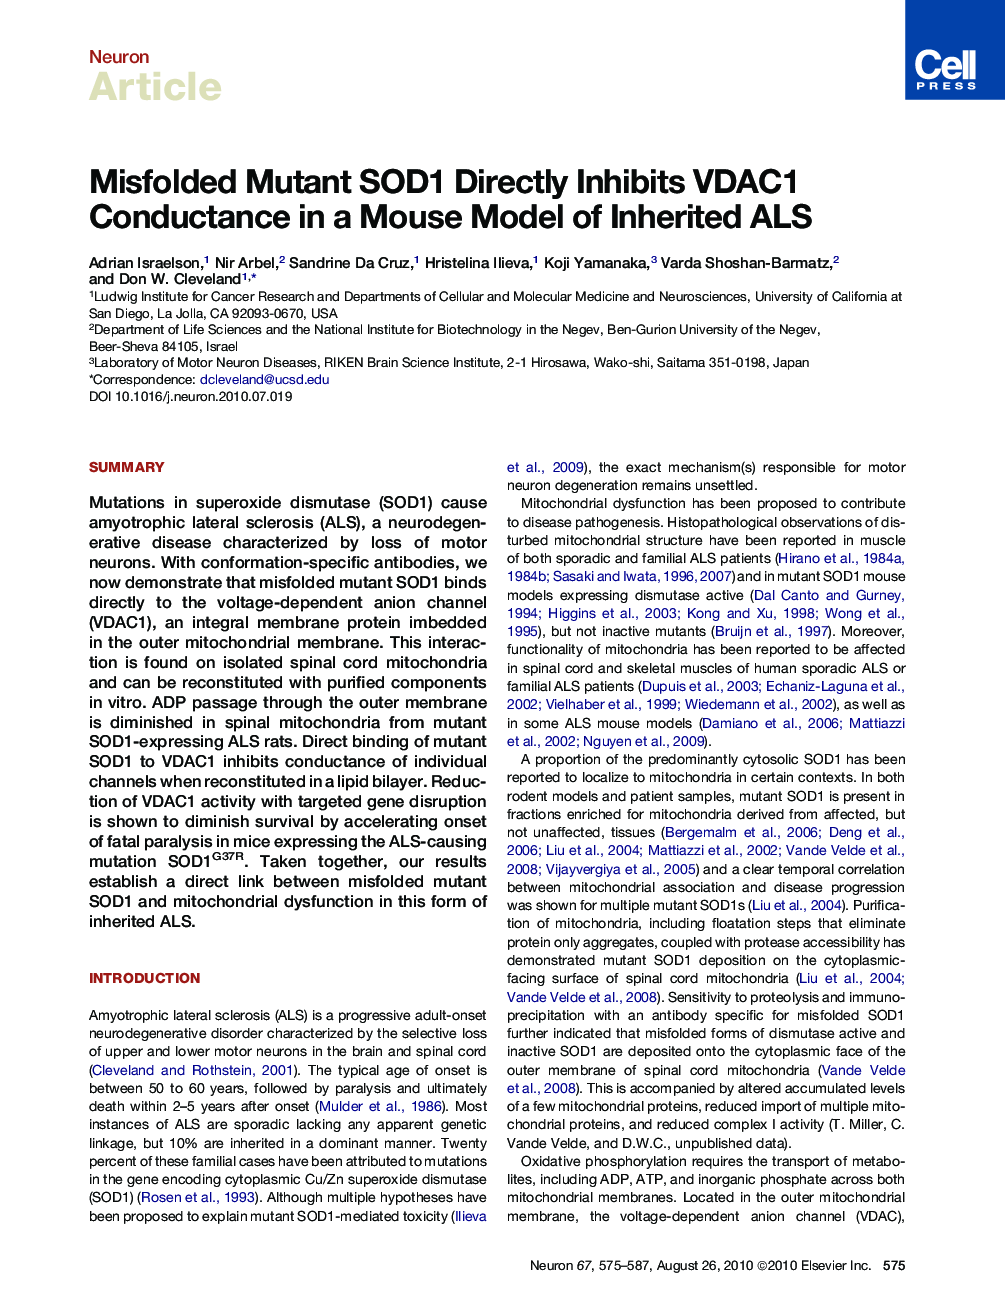 Misfolded Mutant SOD1 Directly Inhibits VDAC1 Conductance in a Mouse Model of Inherited ALS